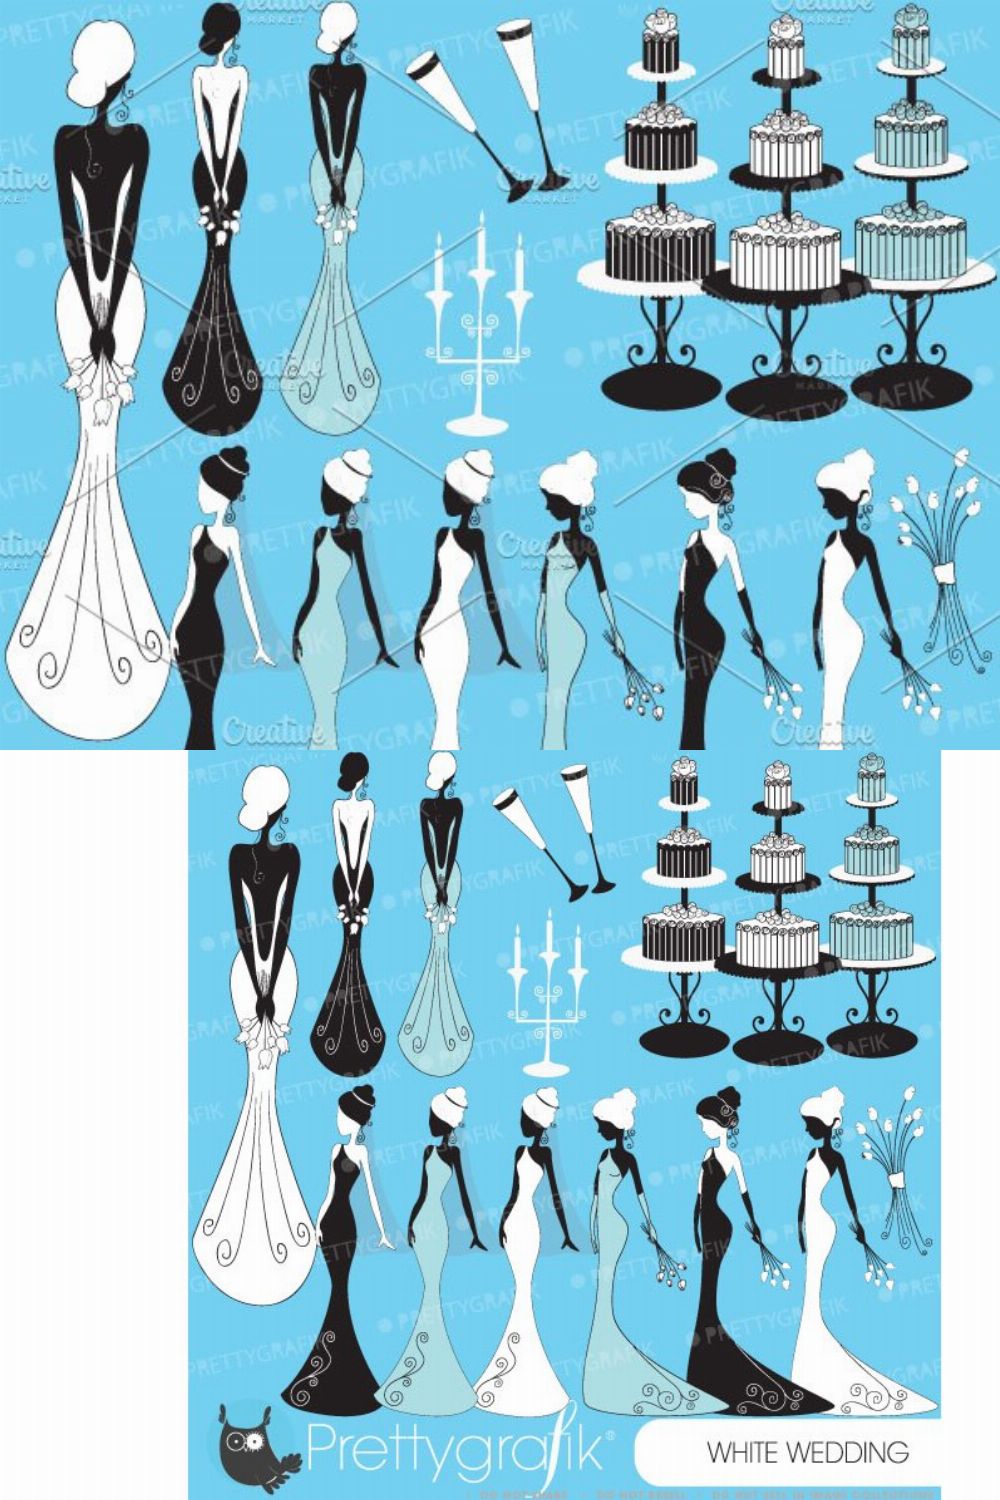 Bride wedding clipart commercial use pinterest preview image.